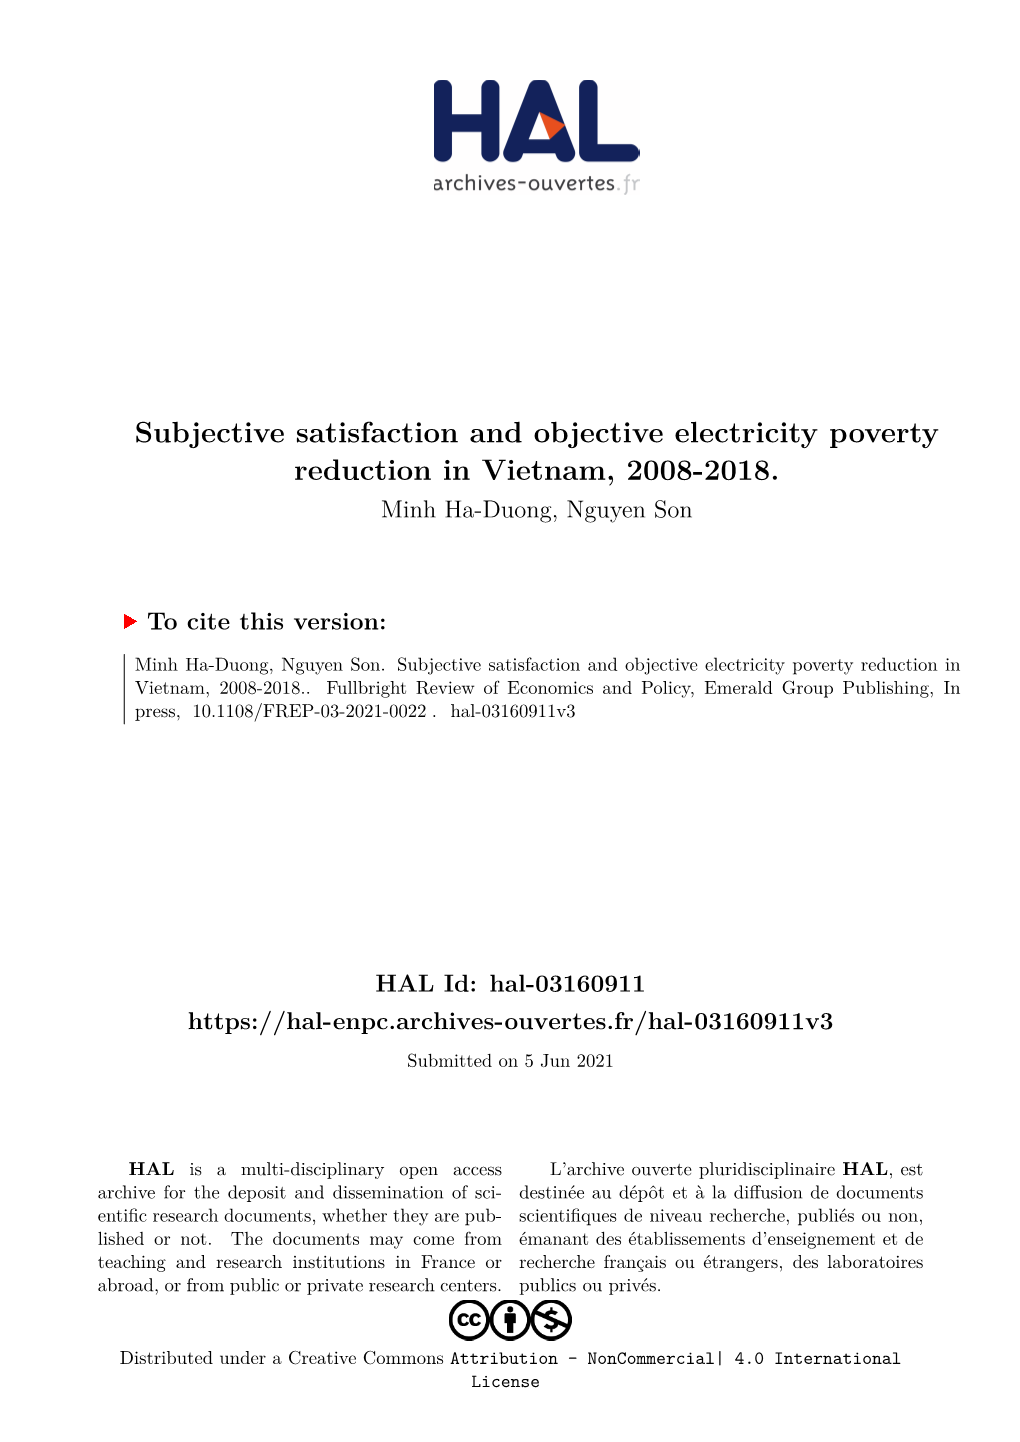 Subjective Satisfaction and Objective Electricity Poverty Reduction in Vietnam, 2008-2018